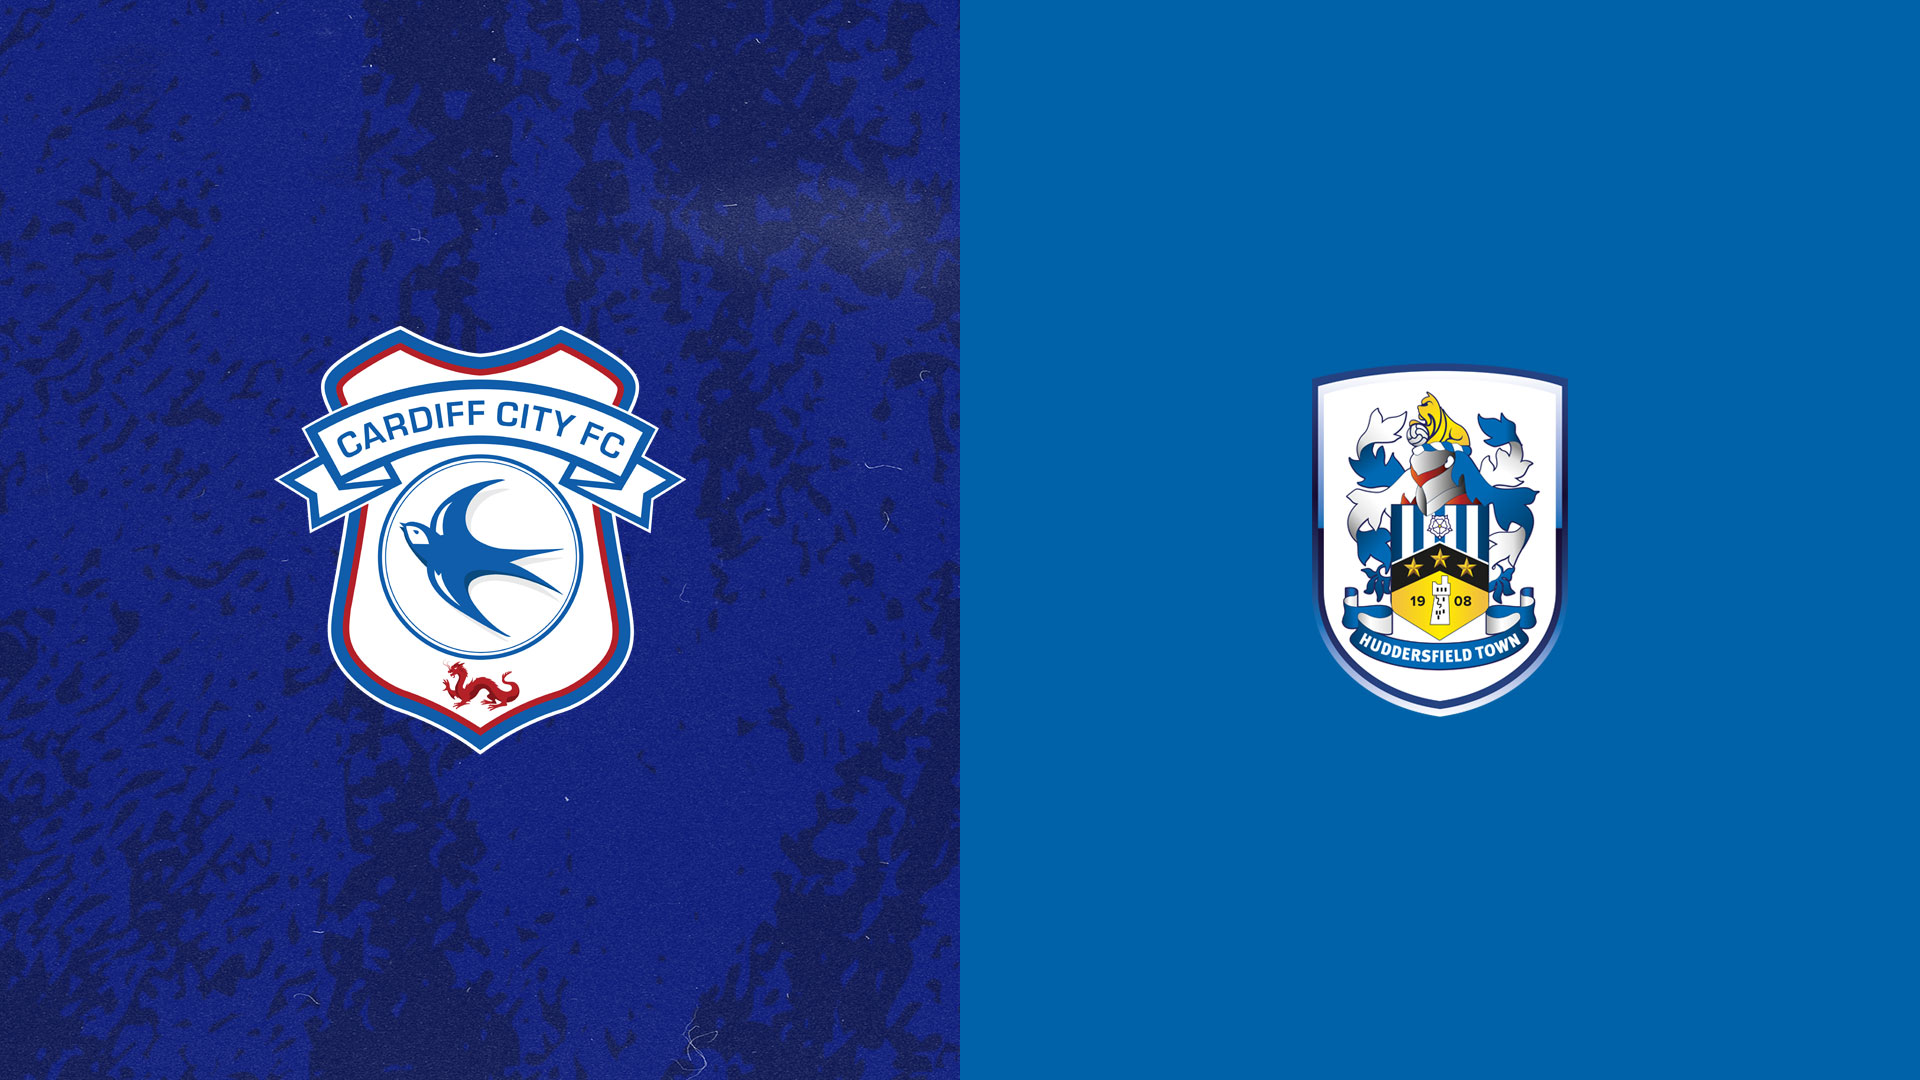 The Bluebirds face the Terriers this weekend...